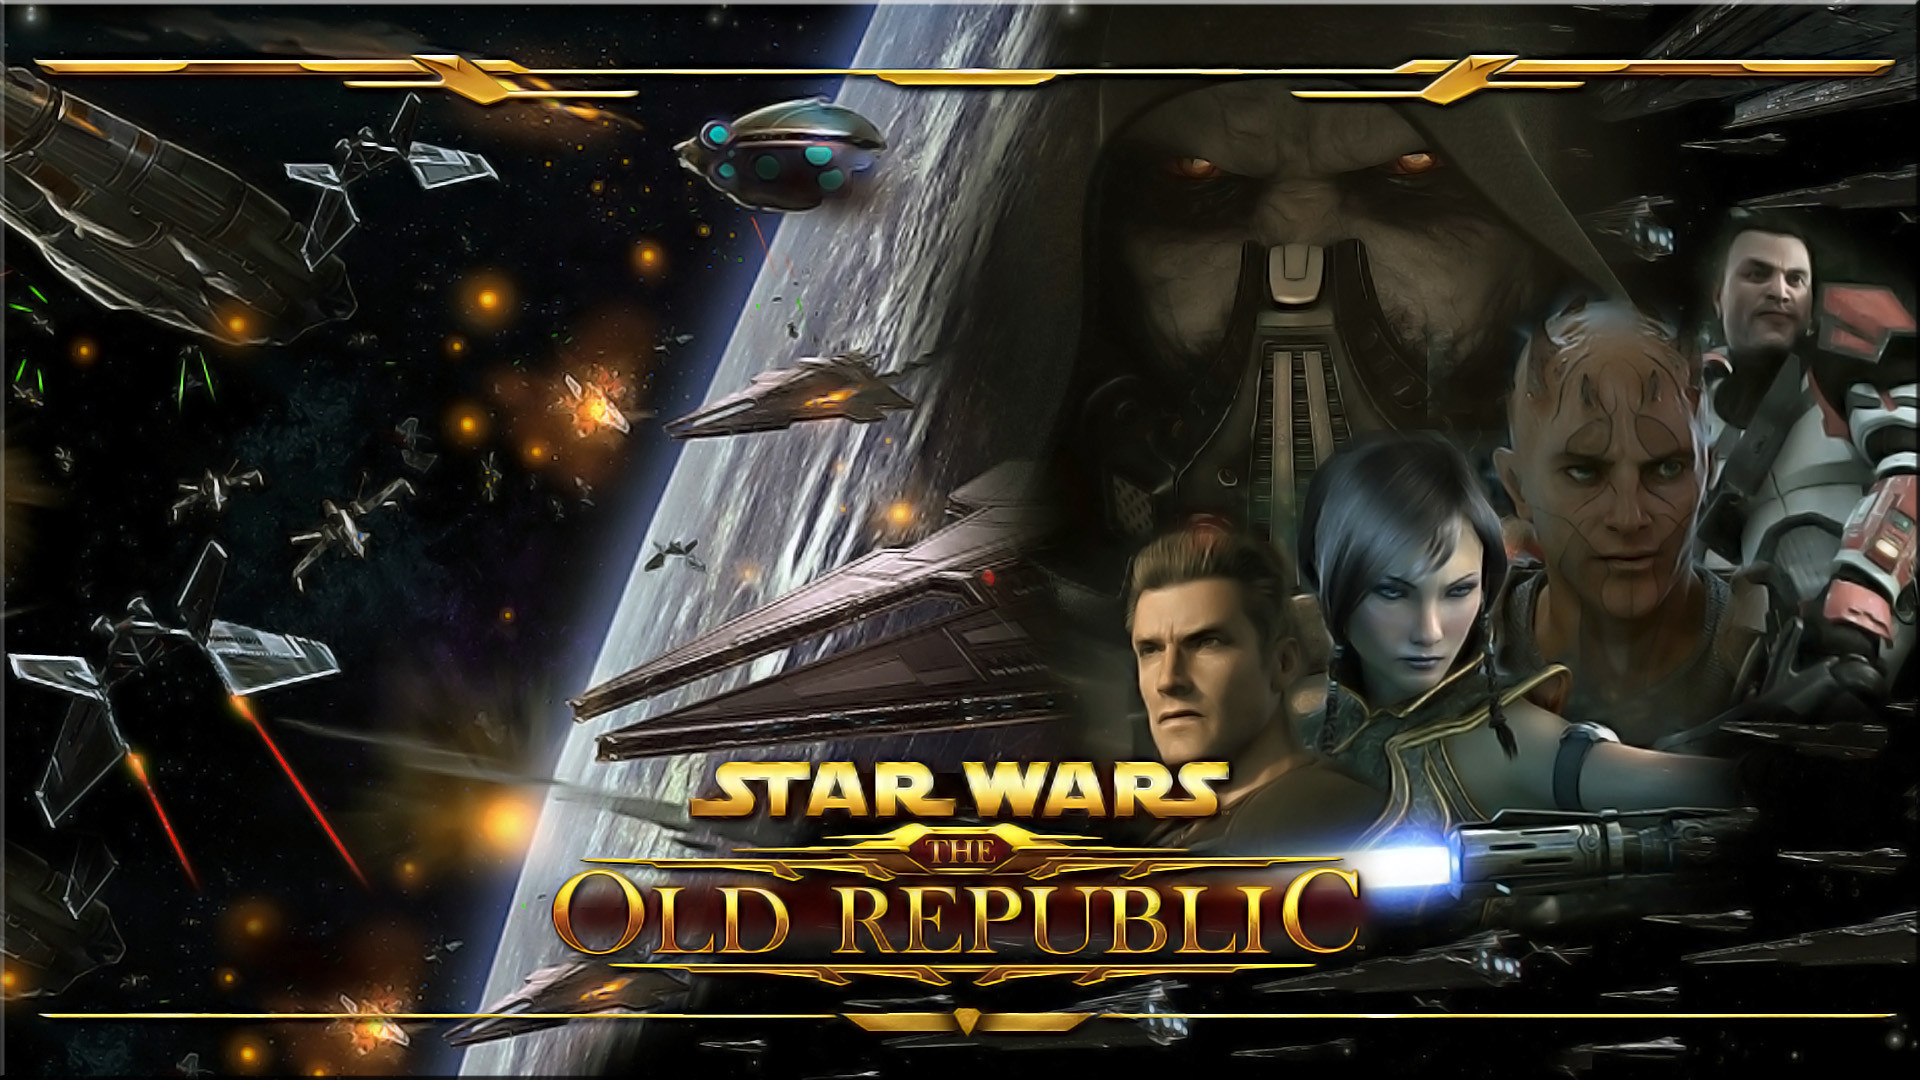 1920x1080 ... STAR WARS: The Old Republic - Unofficial Desktops for full HD and .